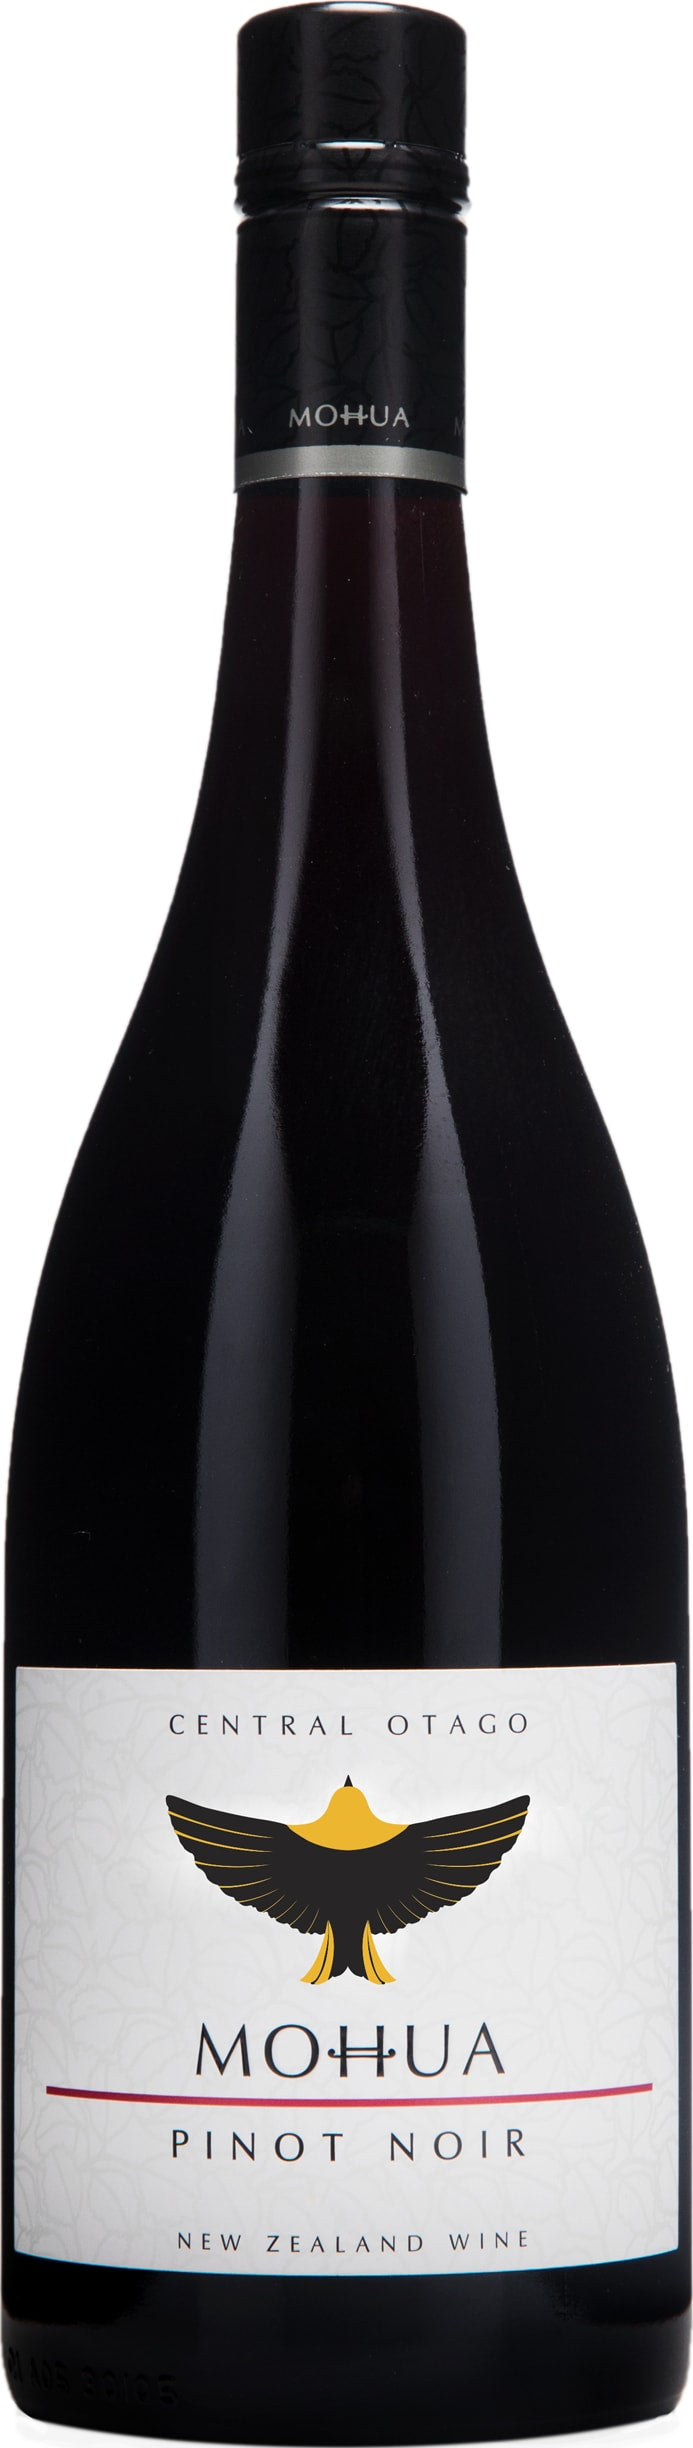 Peregrine Wines Mohua Pinot Noir 2018 75cl - Buy Peregrine Wines Wines from GREAT WINES DIRECT wine shop